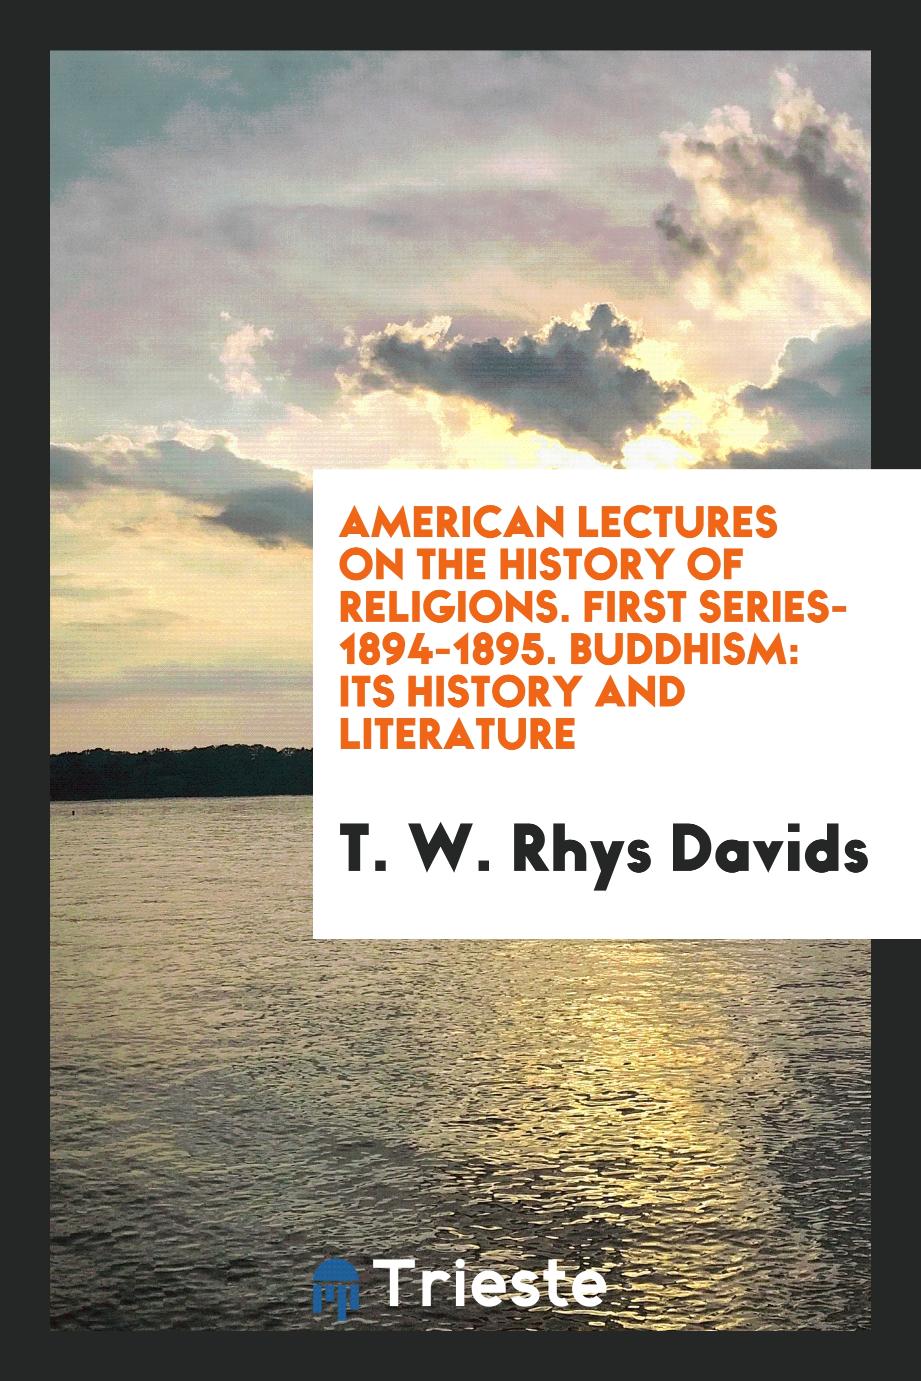 American Lectures on the History of Religions. First Series-1894-1895. Buddhism: Its History and Literature